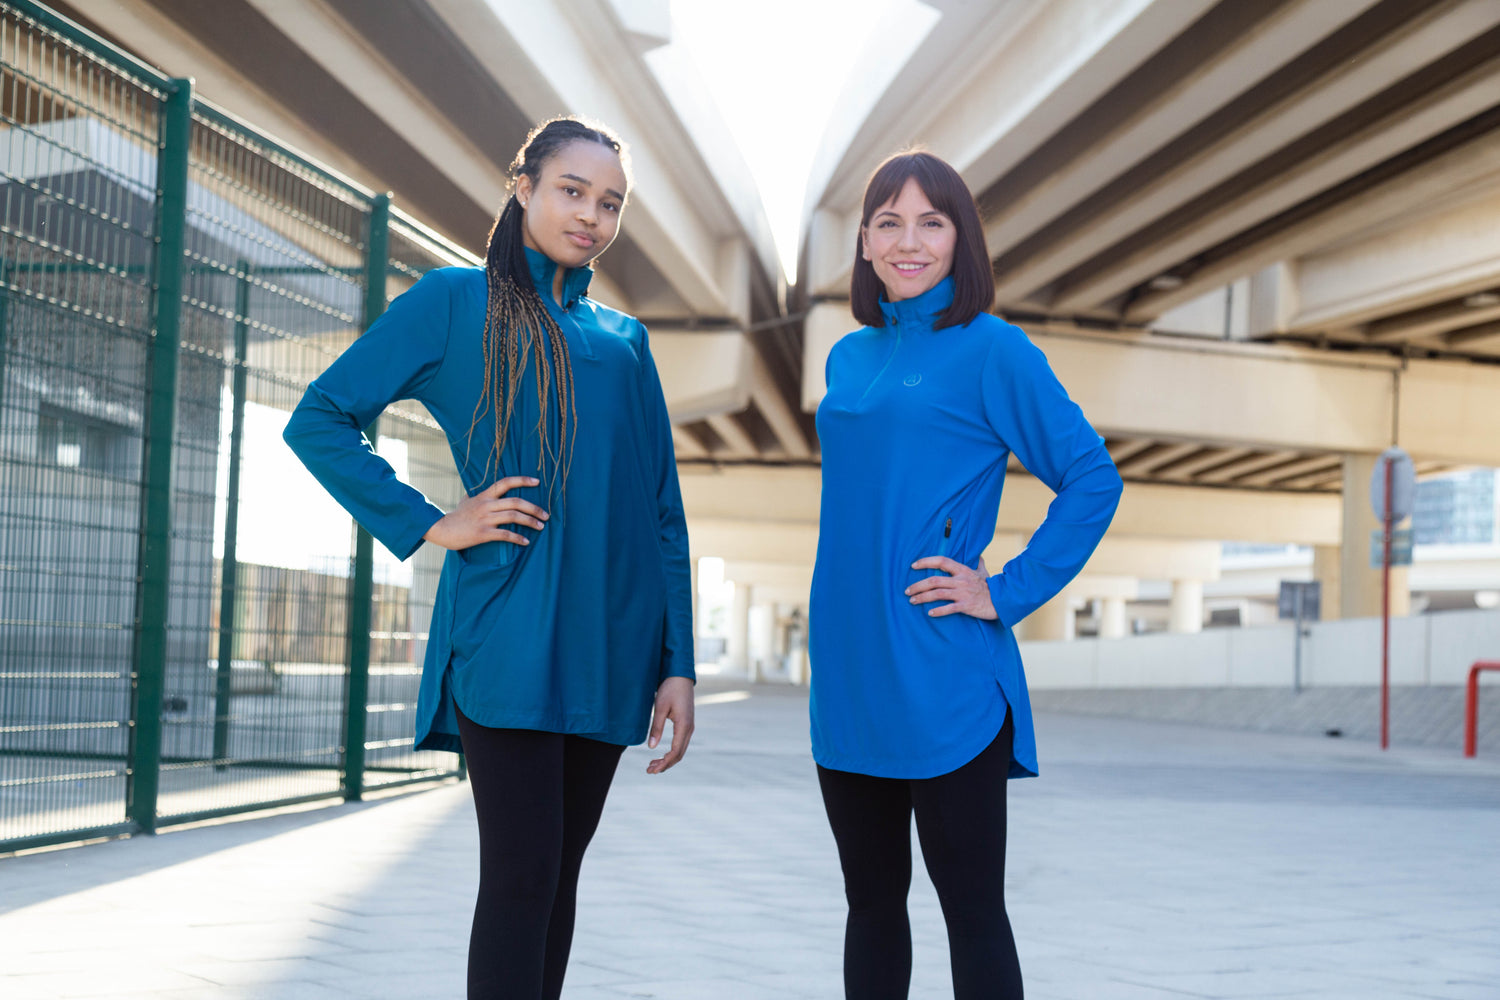 Modest sportswear for hijabi athletes and all women who choose to wear modest athletic wear. 